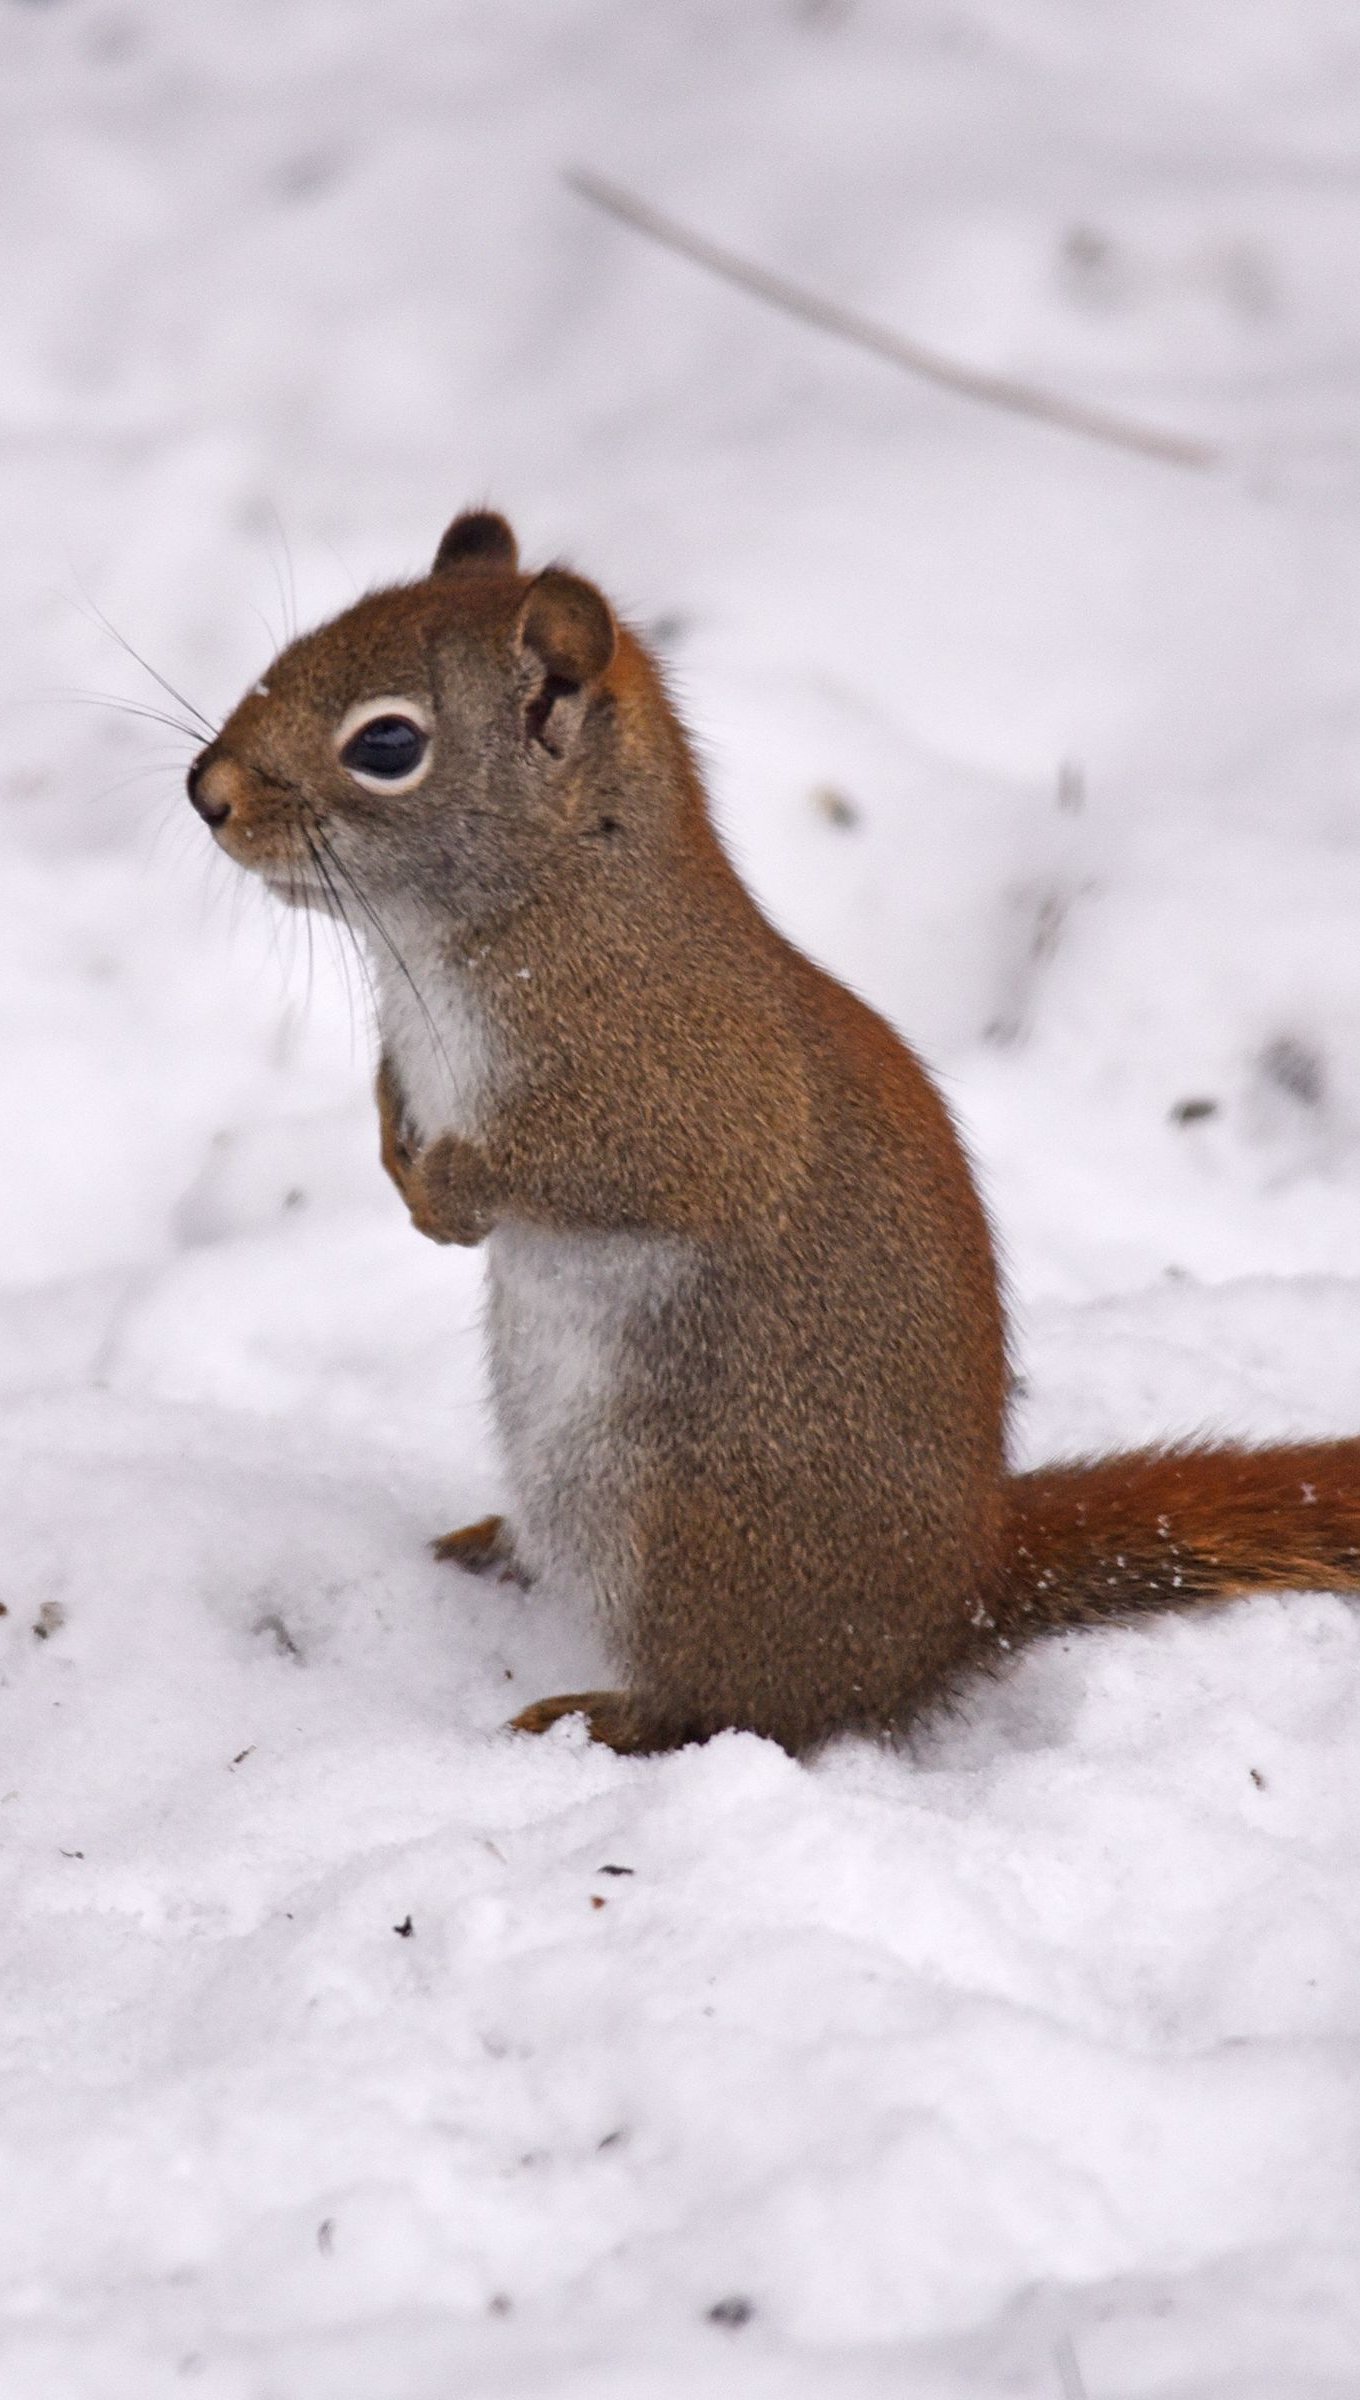 Red squirrell in the snow Wallpaper 4k Ultra HD ID:11248